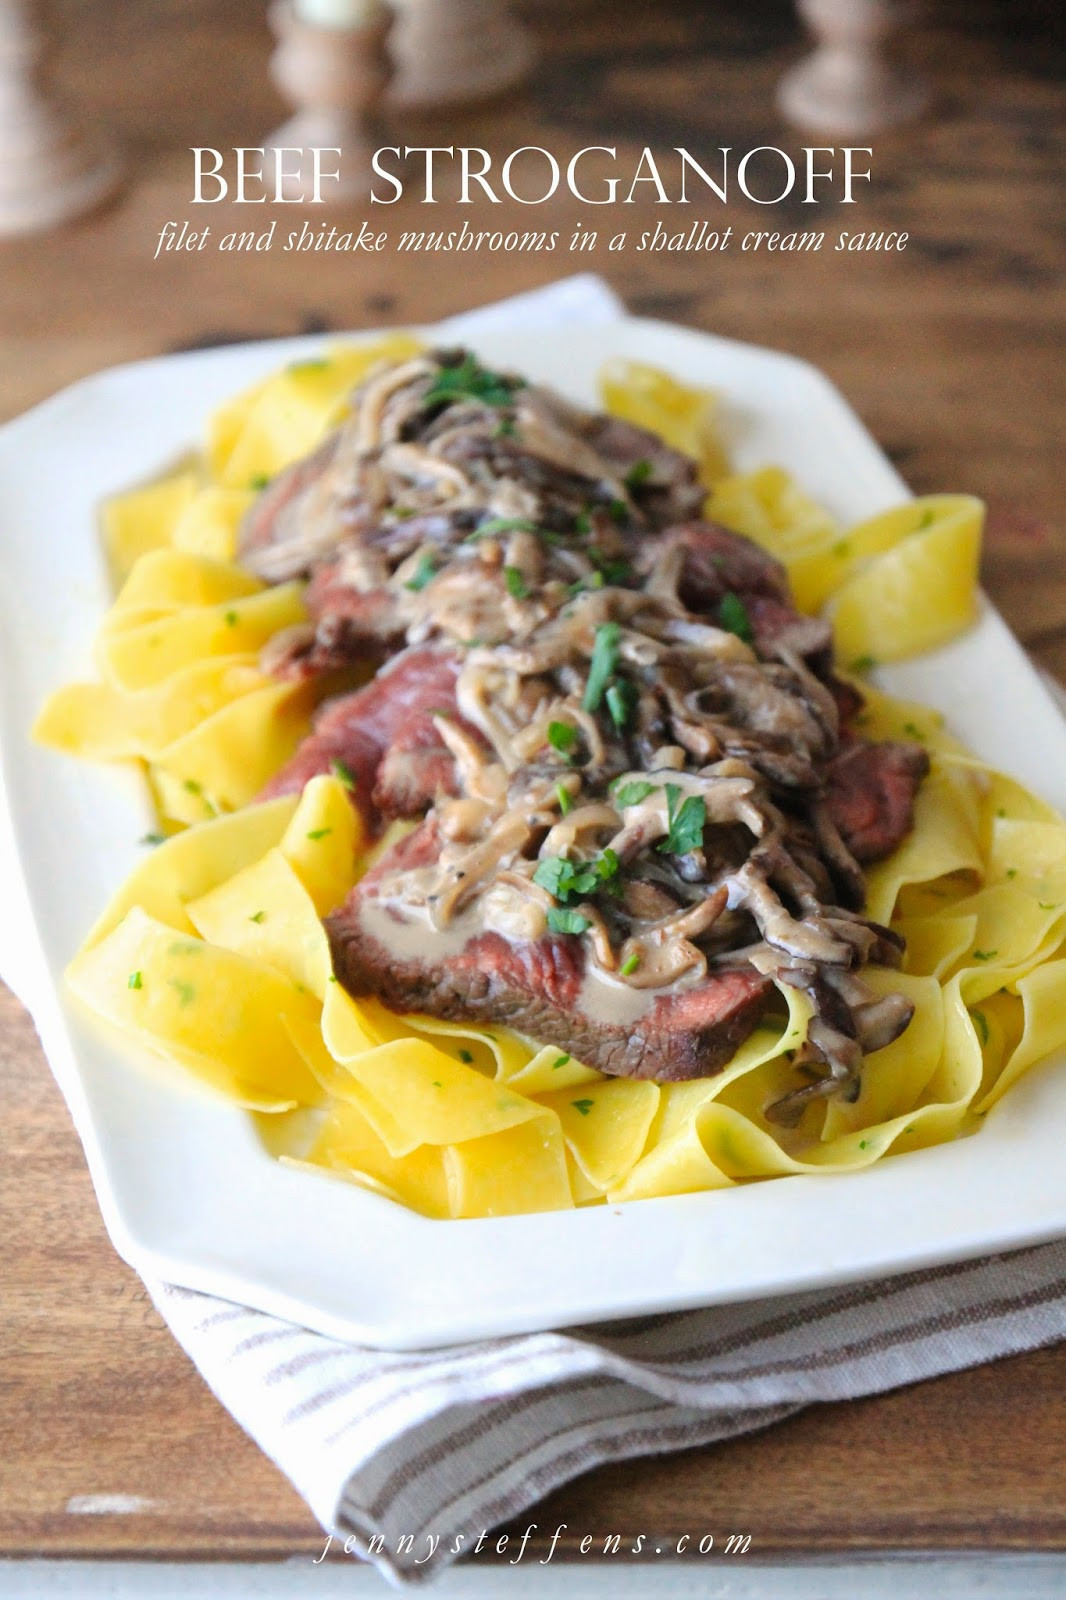 Steak And Egg Noodles
 20 Ideas for Steak and Egg Noodles Best Round Up Recipe